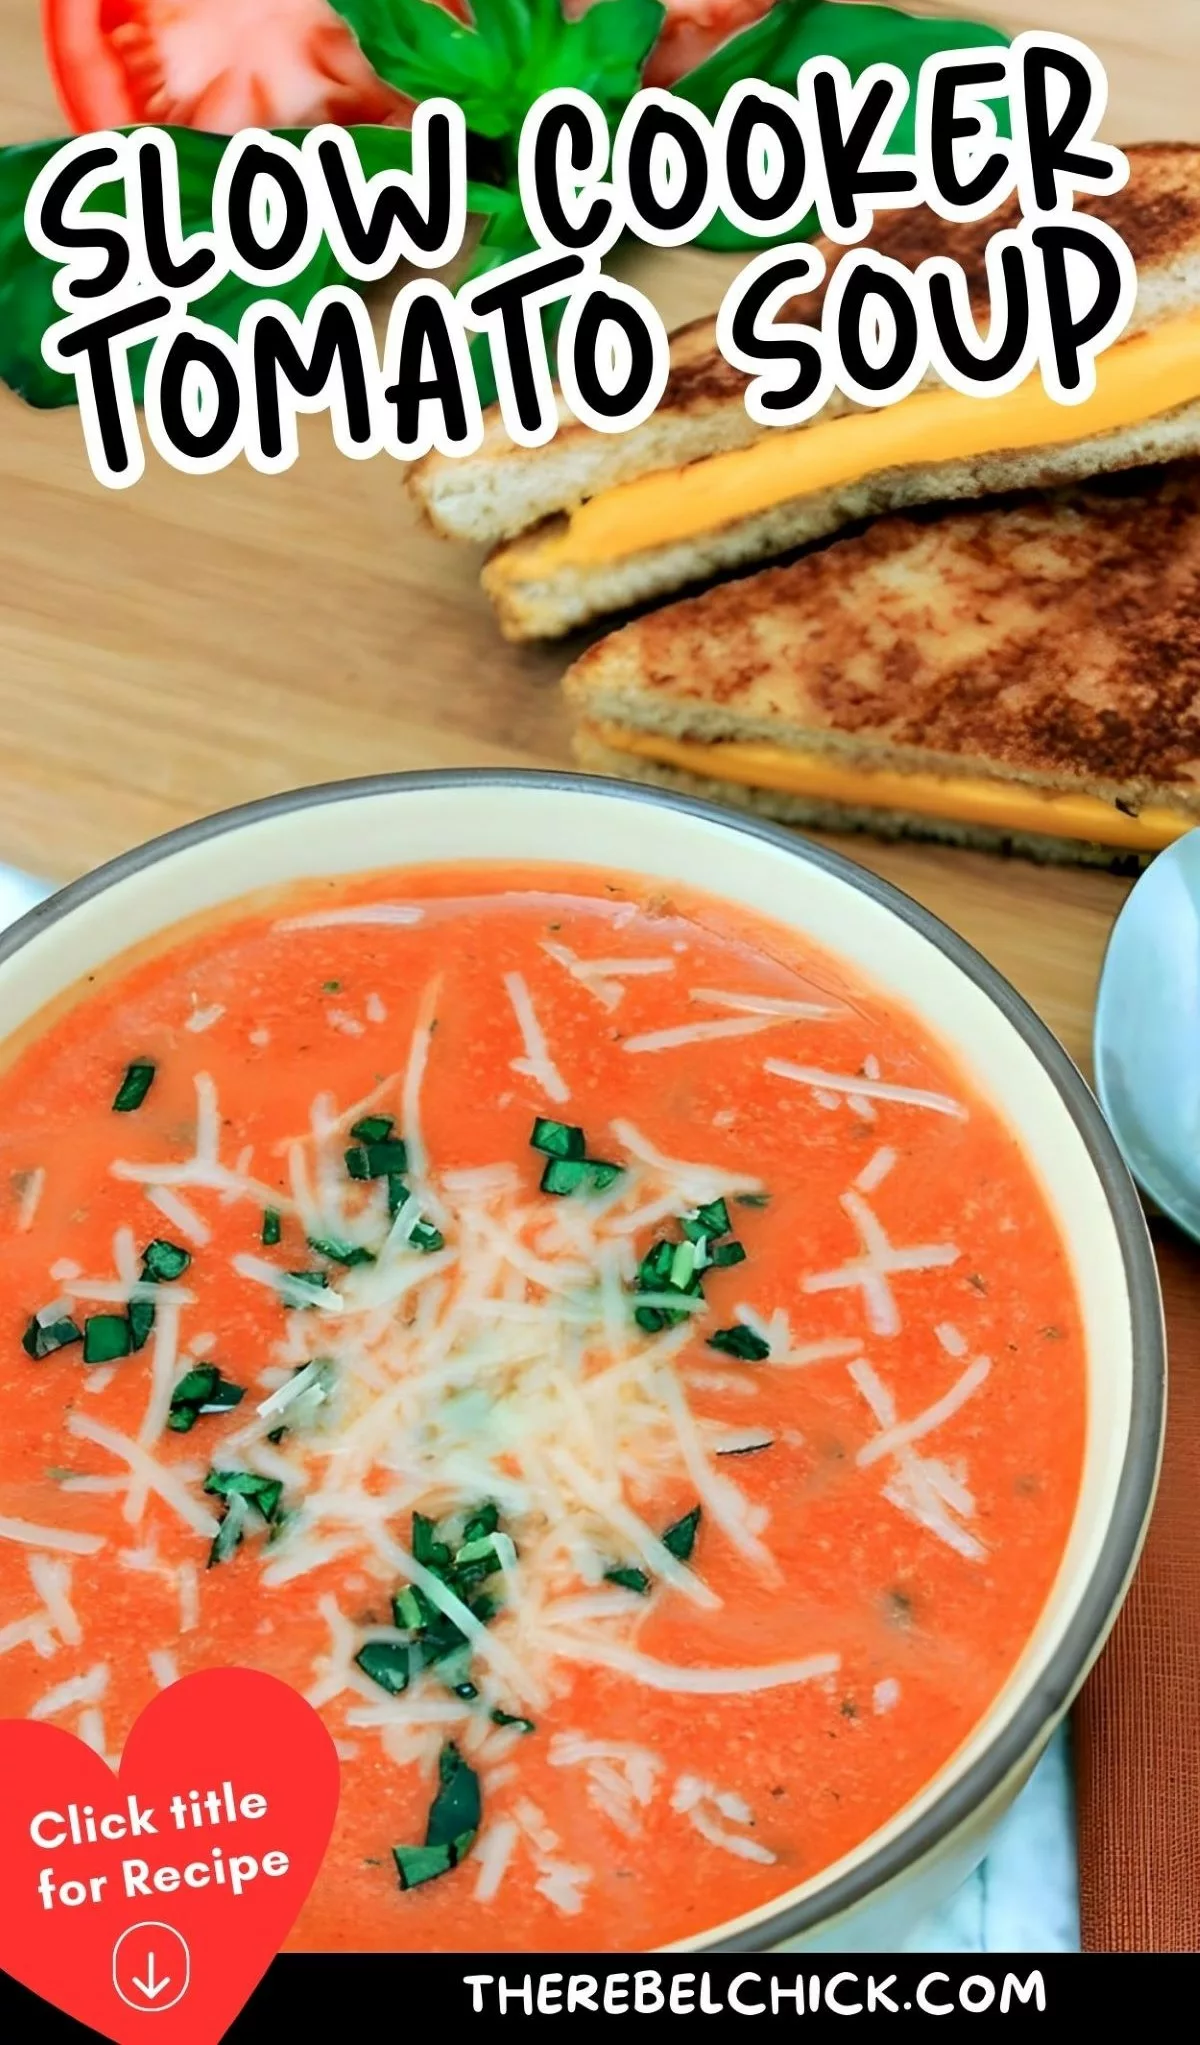 https://therebelchick.com/wp-content/uploads/2020/04/Slow-Cooker-Tomato-Soup-with-Fresh-Tomatoes-jpg.webp